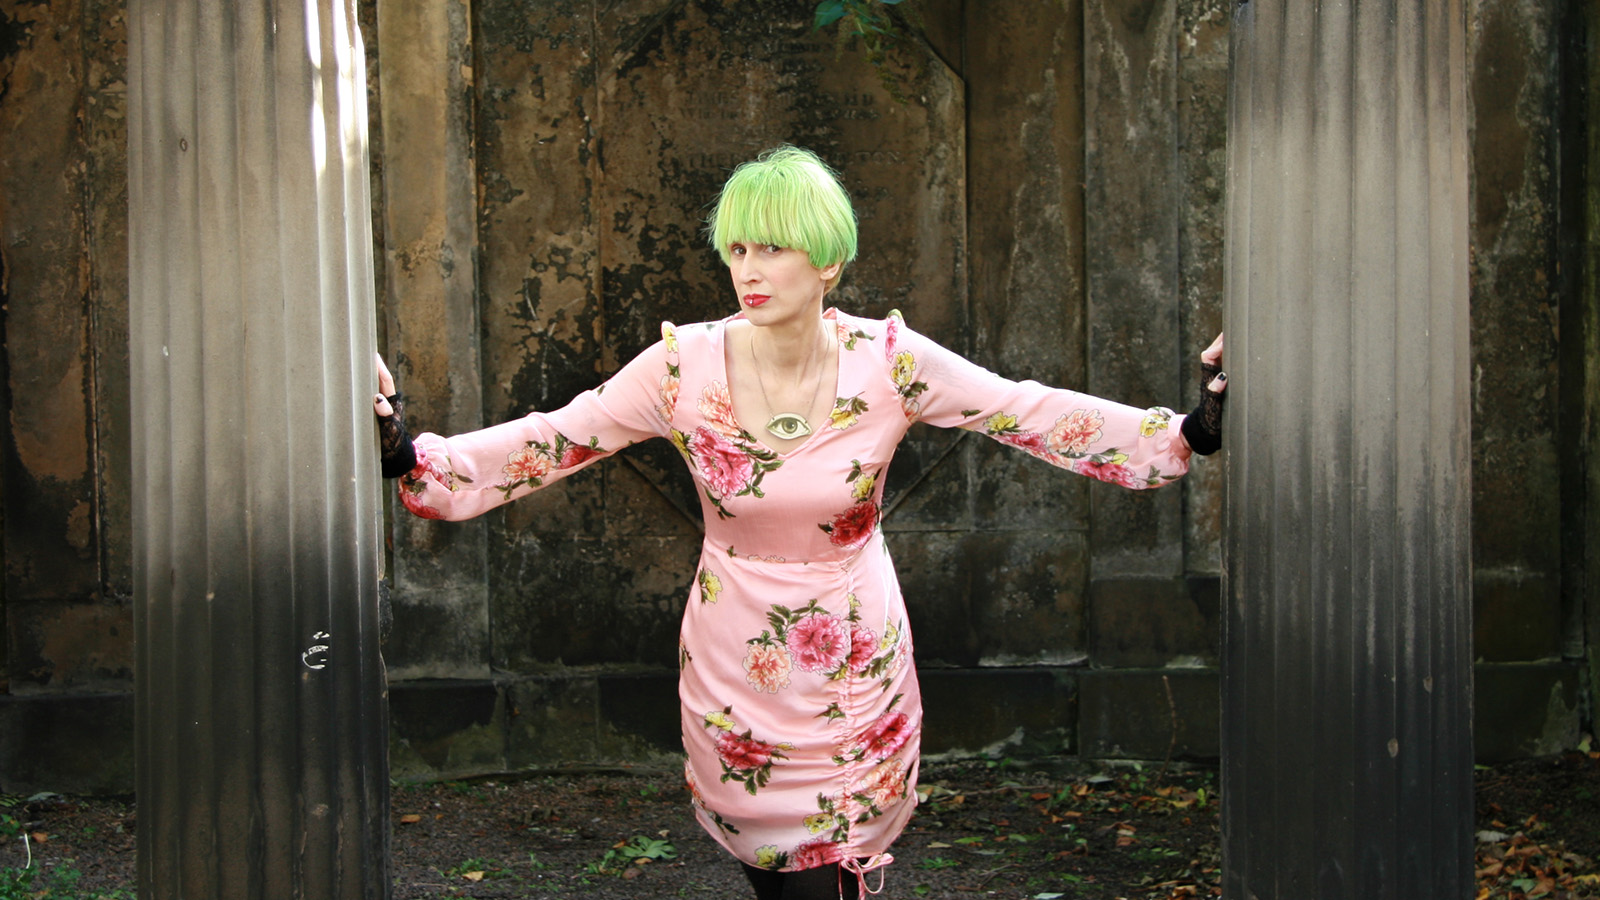 The author Ever Dundas is a woman with green hair wearing a boldly printed pink dress